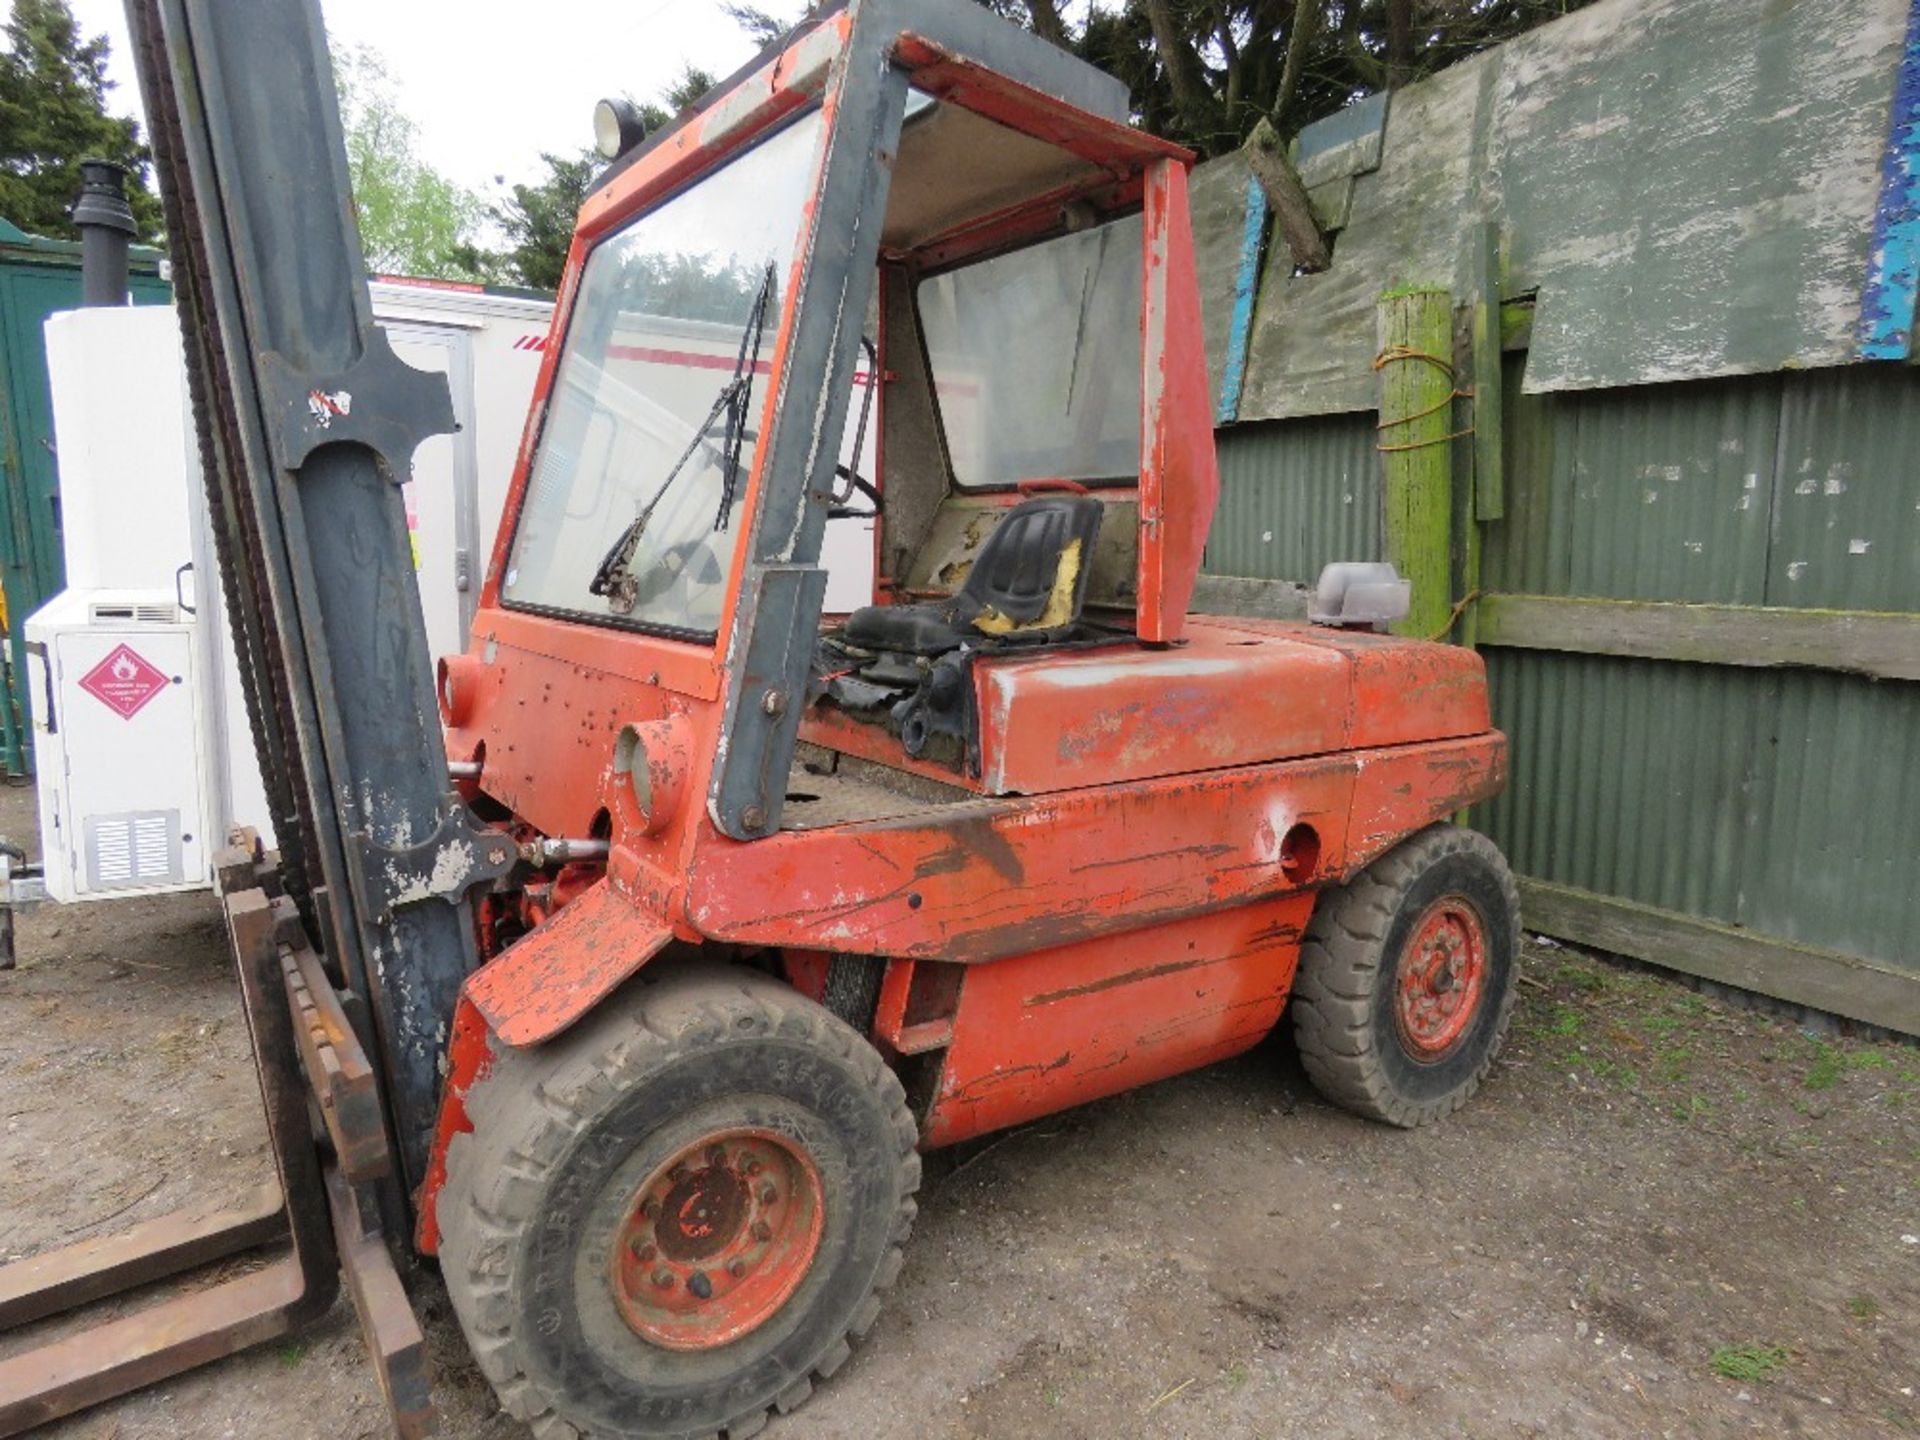 LINDE 6 TONNE DIESEL ENGINED FORKLIFT TRUCK WITH 7FT TINES FITTED. WHEN TESTED WAS SEEN TO RUN, DRIV